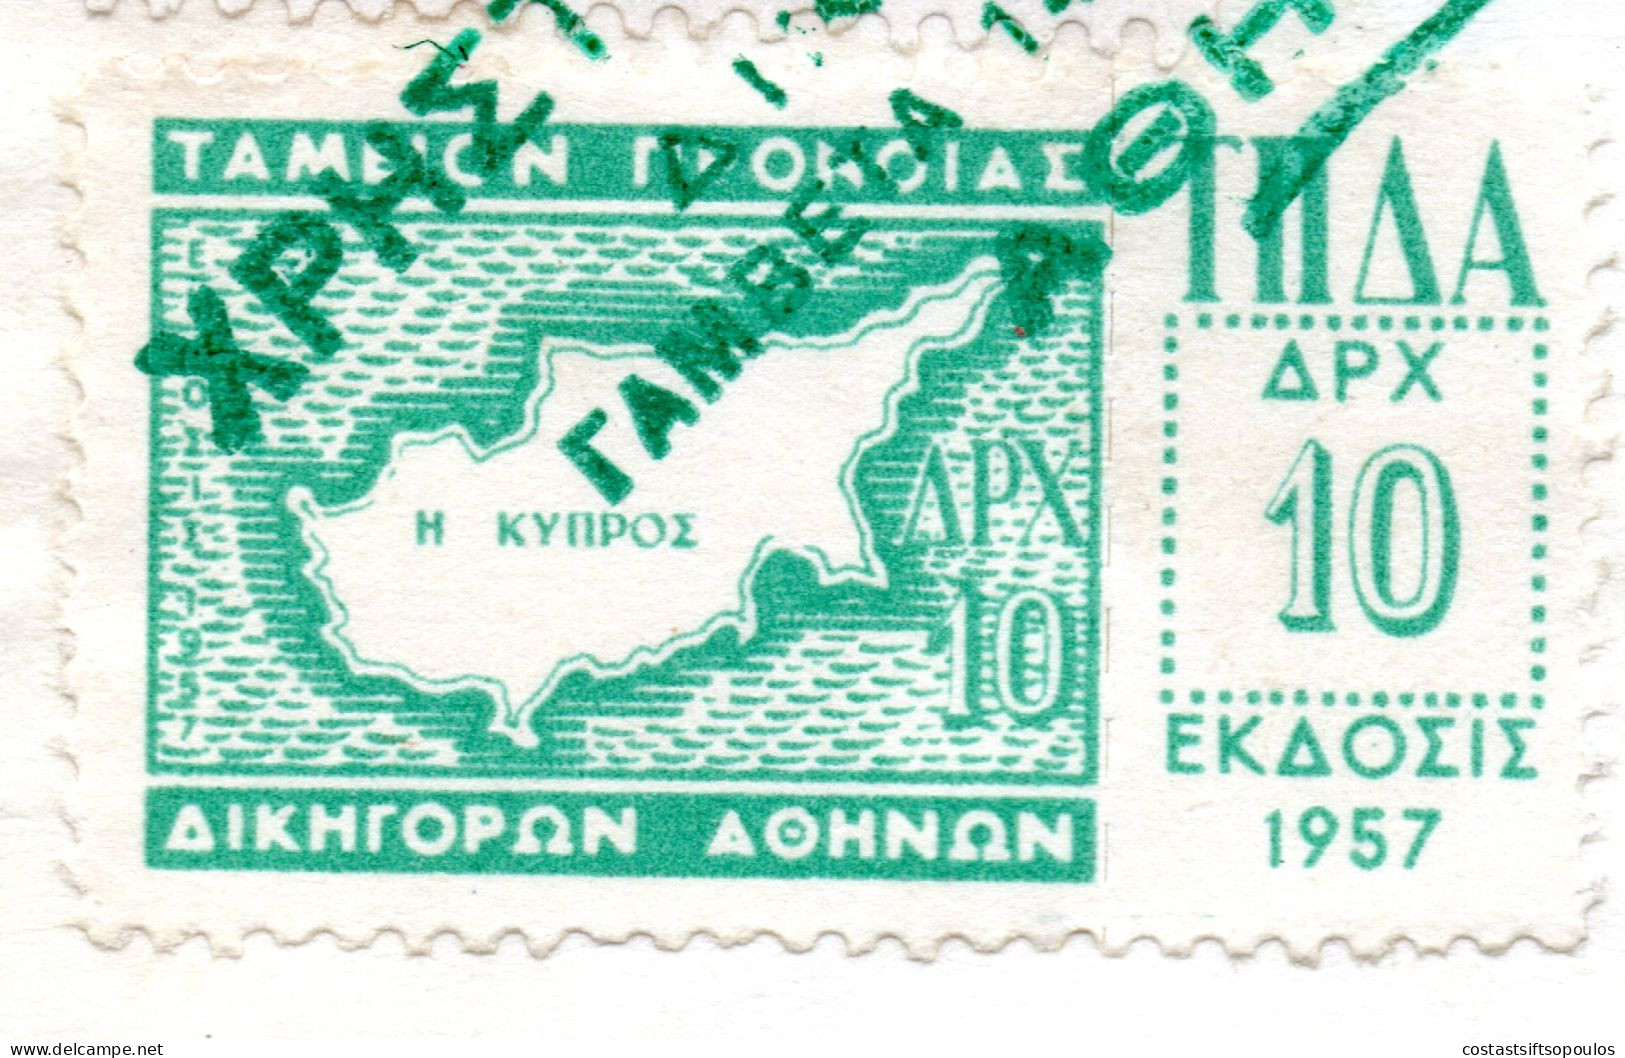 2505. GREECE. 1960 6 PAGES DOCUMENT WITH SCARCE 1957 CYPRUS MAP 10 DR. REVENUE. CROSS FOLDED. WILL BE SHIPPED FOLDED - Fiscaux